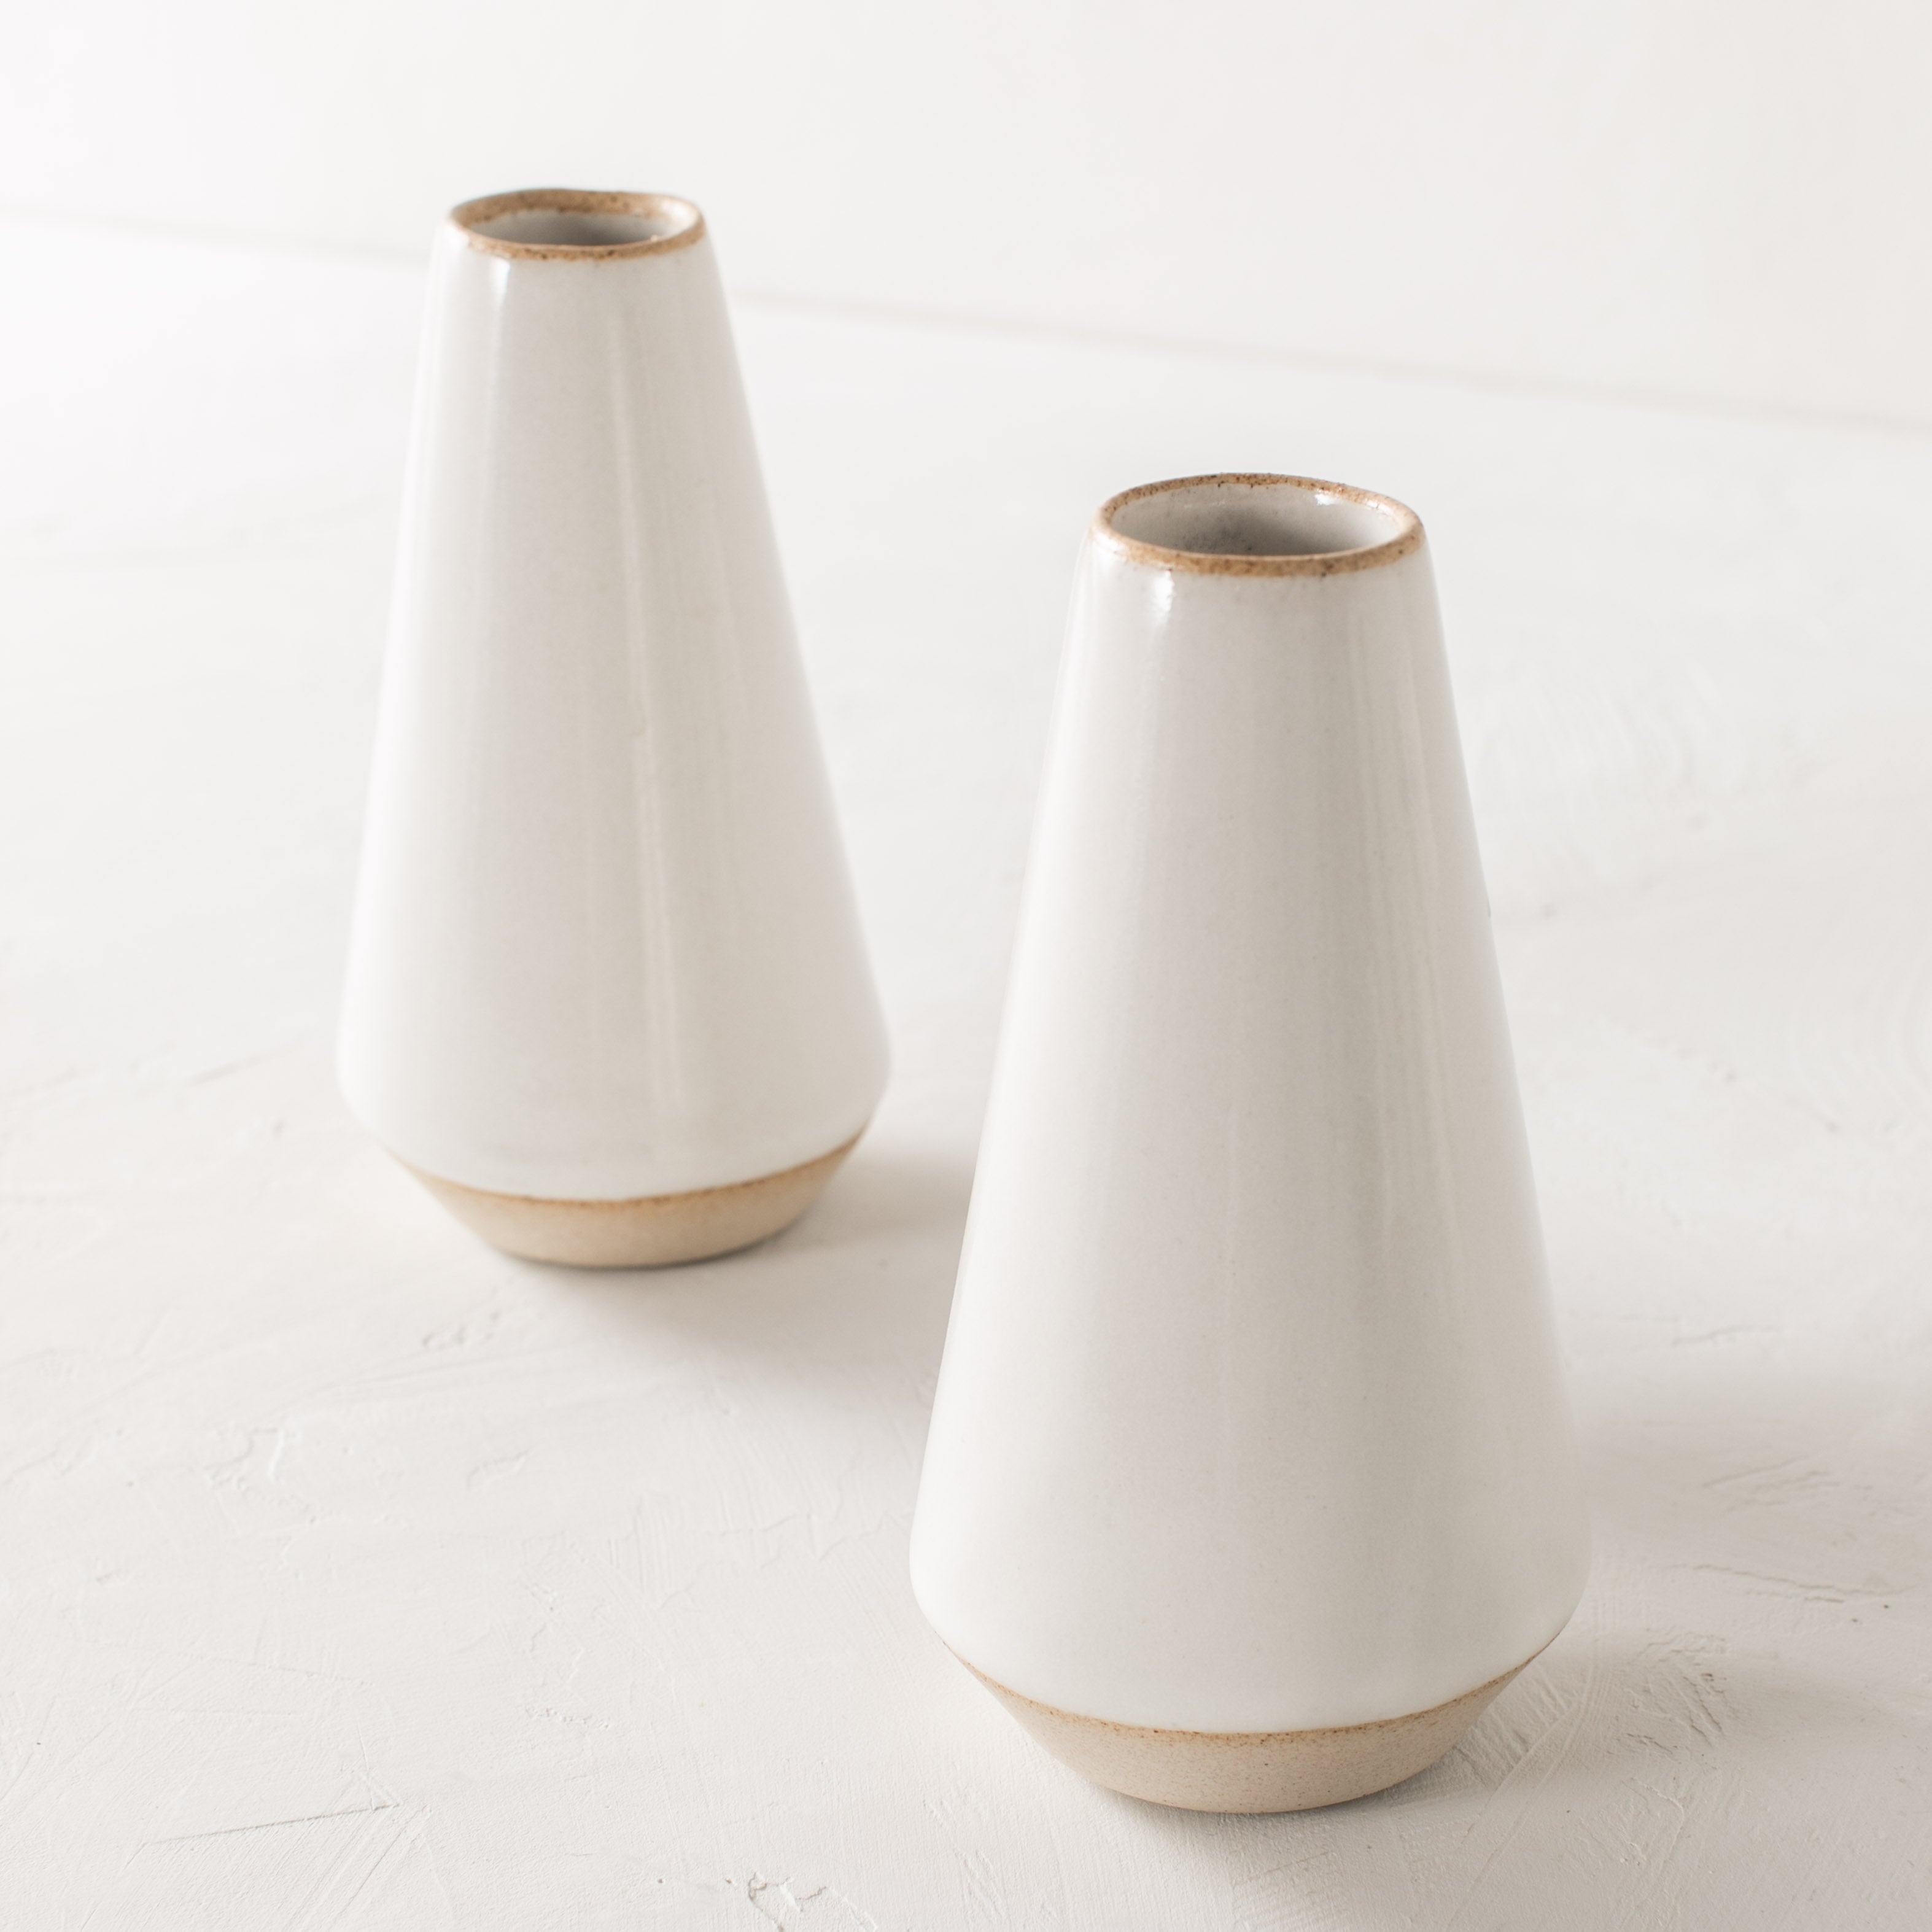 Two minimal white 7 inch tapered bud vase. White glazed with an exposes stoneware rim and base. Both upright side by side on a white plaster textured tabletop and white textured back drop. Handmade ceramic bud vase designed and sold by Convivial Production, Kansas City Ceramics.